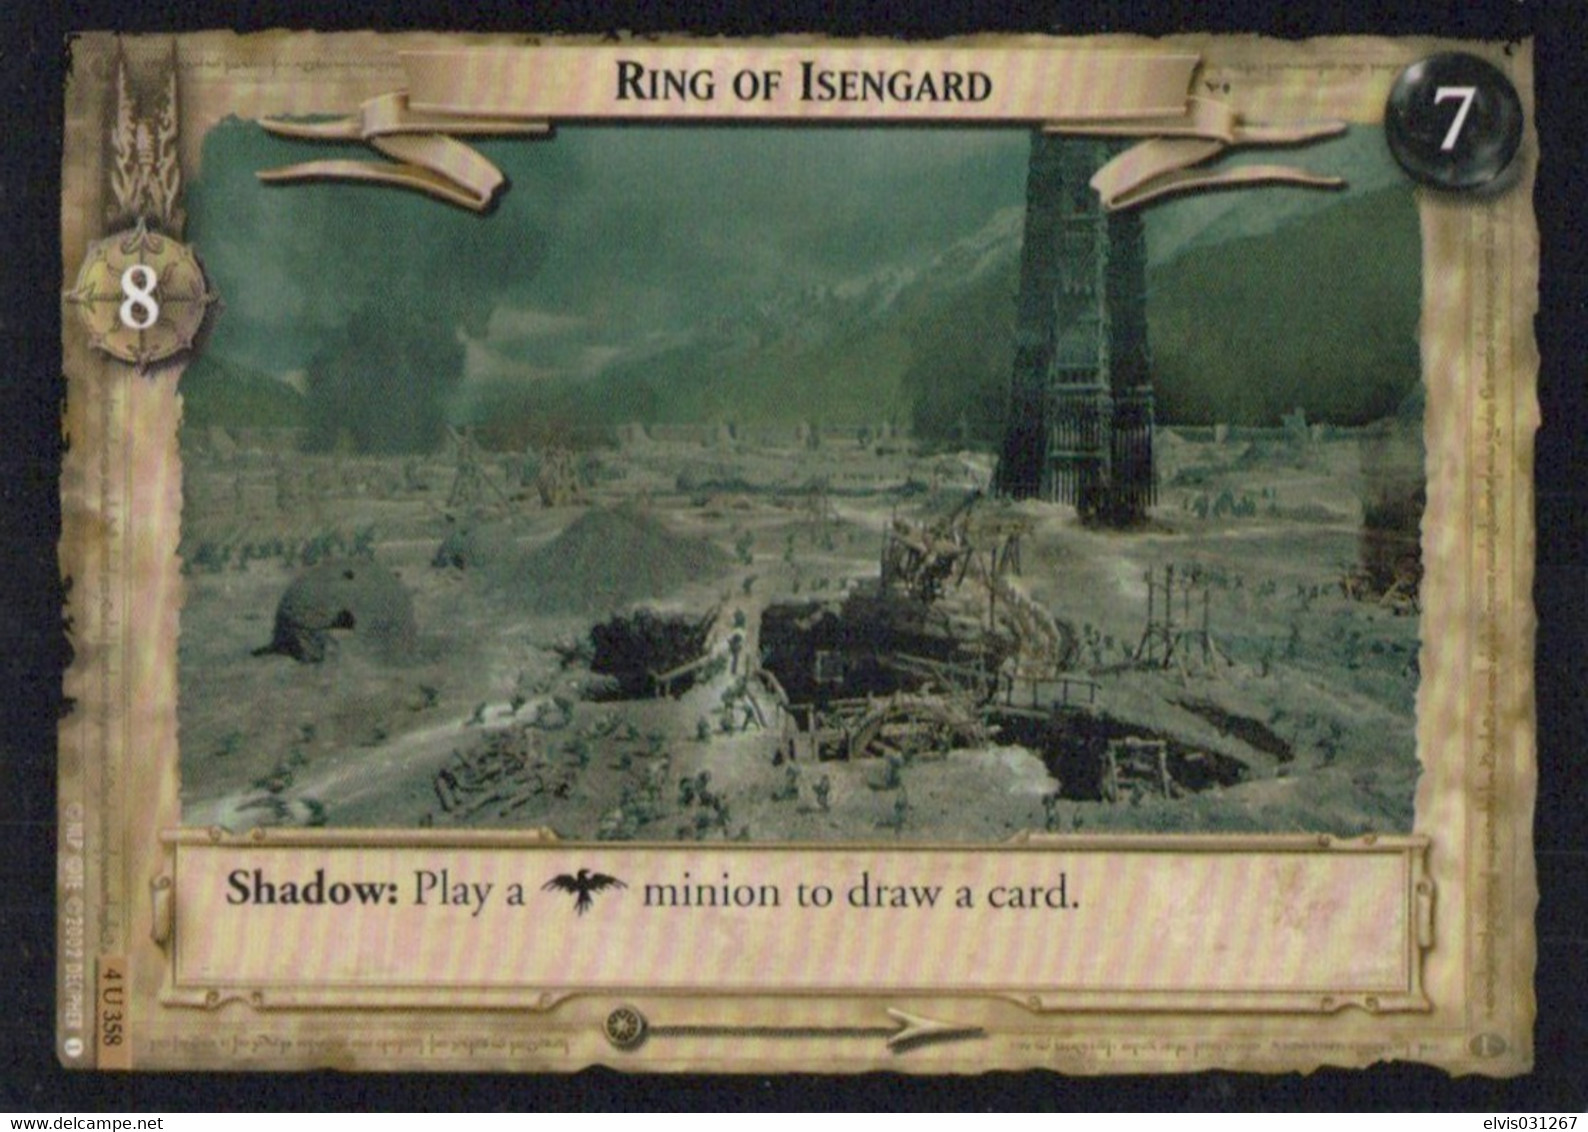 Vintage The Lord Of The Rings: #7-8 Ring Of Isengard - EN - 2001-2004 - Mint Condition - Trading Card Game - El Señor De Los Anillos